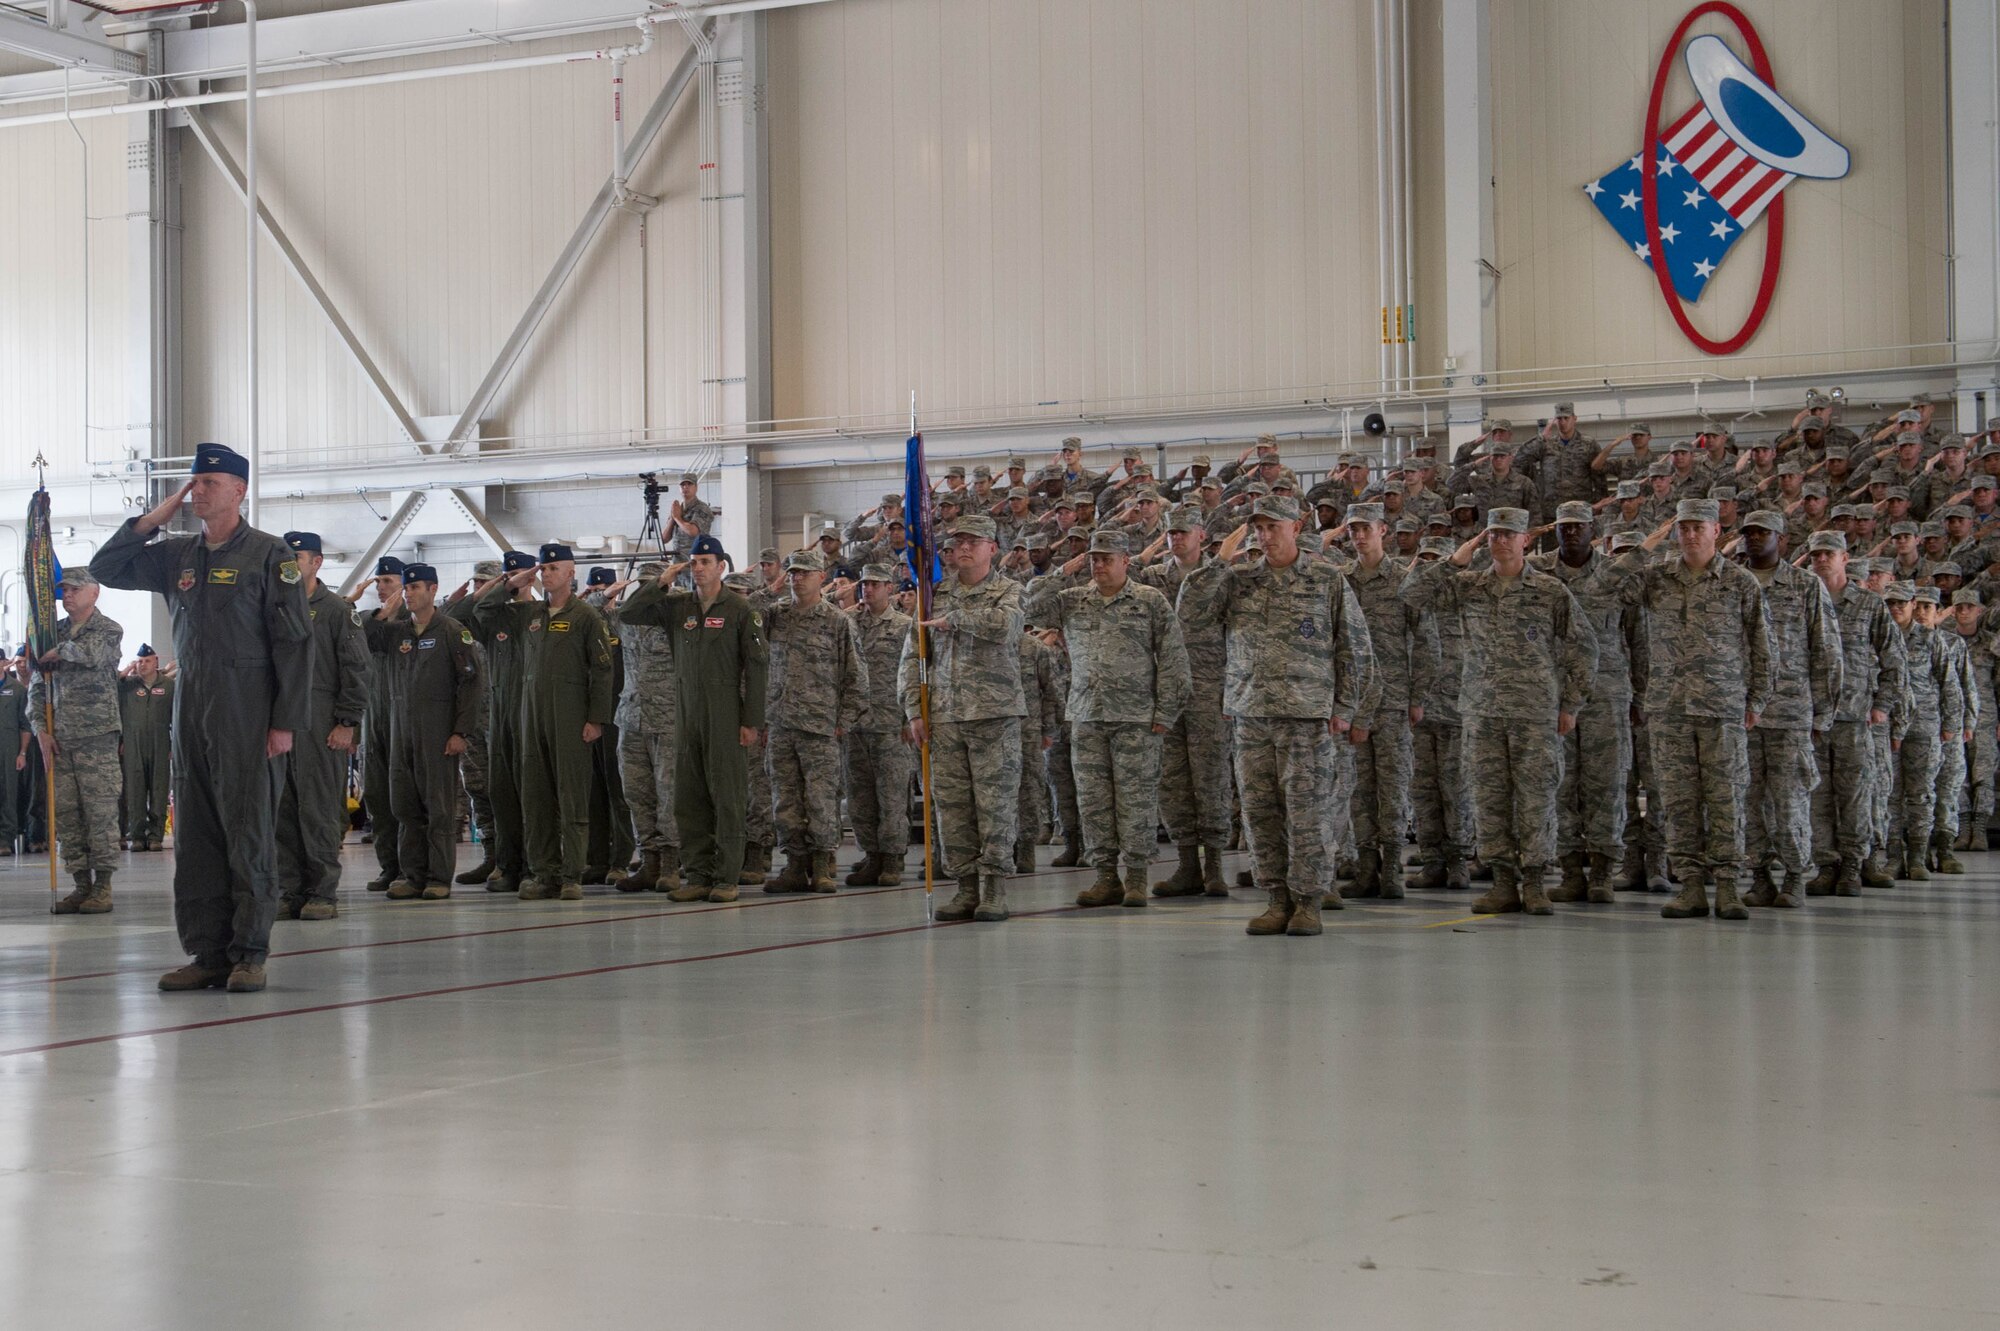 U.S. Air Force Airmen assigned to the 1st Fighter Wing stand in formation, saluting during the 1st FW Change of Command ceremony at Joint Base Langley-Eustis, Va., June 23, 2017. Former commander of the 1st FW, U.S. Air Force Col. Peter Fesler, reliquinshed command and passed it to U.S. Air Force Col. Jason Hinds. (U.S. Air Force photo/Senior Airman Derek Seifert)